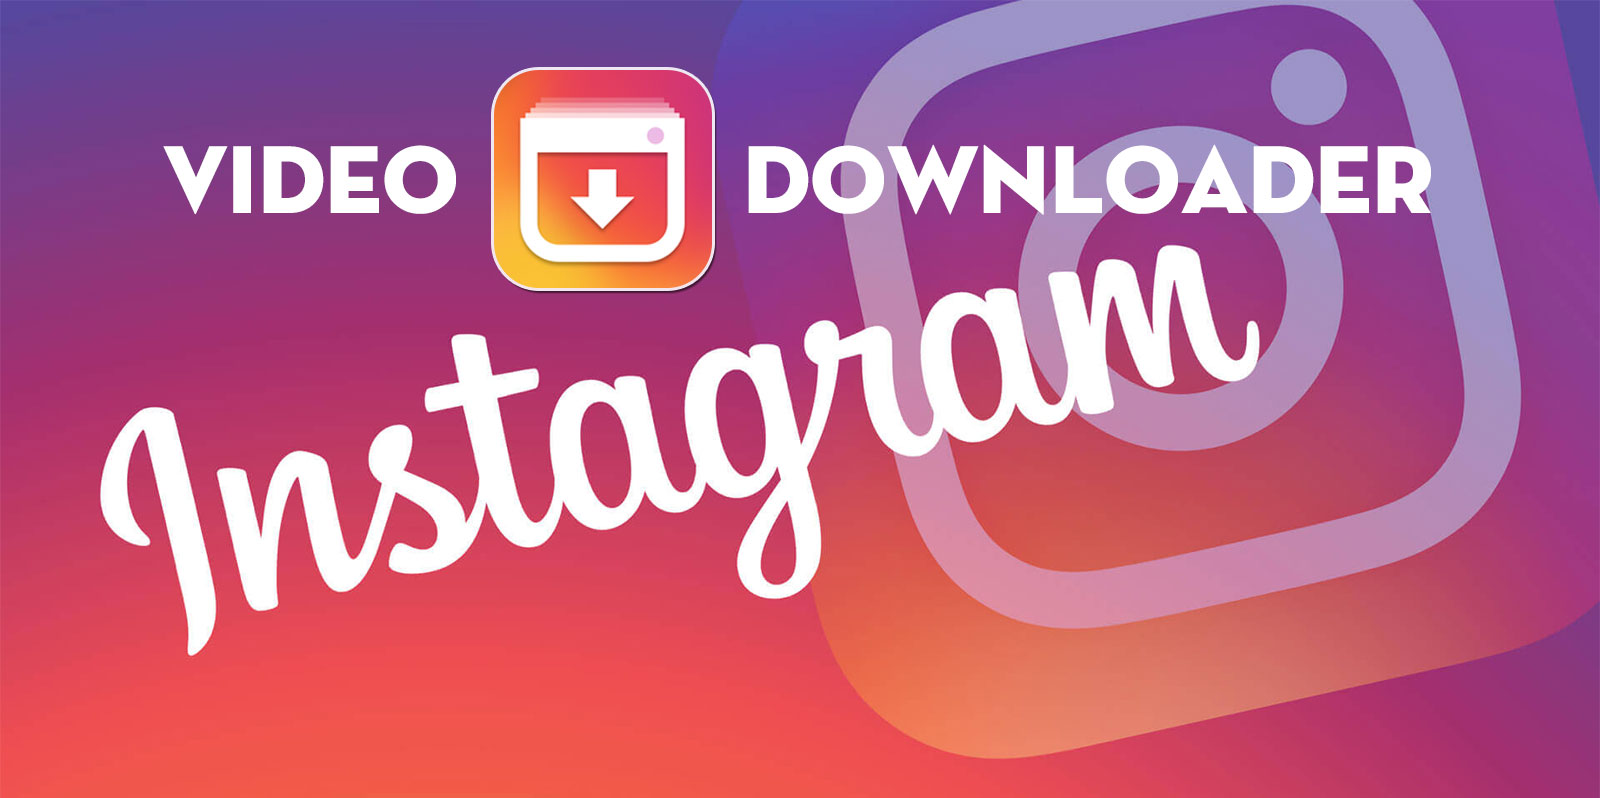 Photo & Video Downloader for Instagram - Instake for Android - APK Download